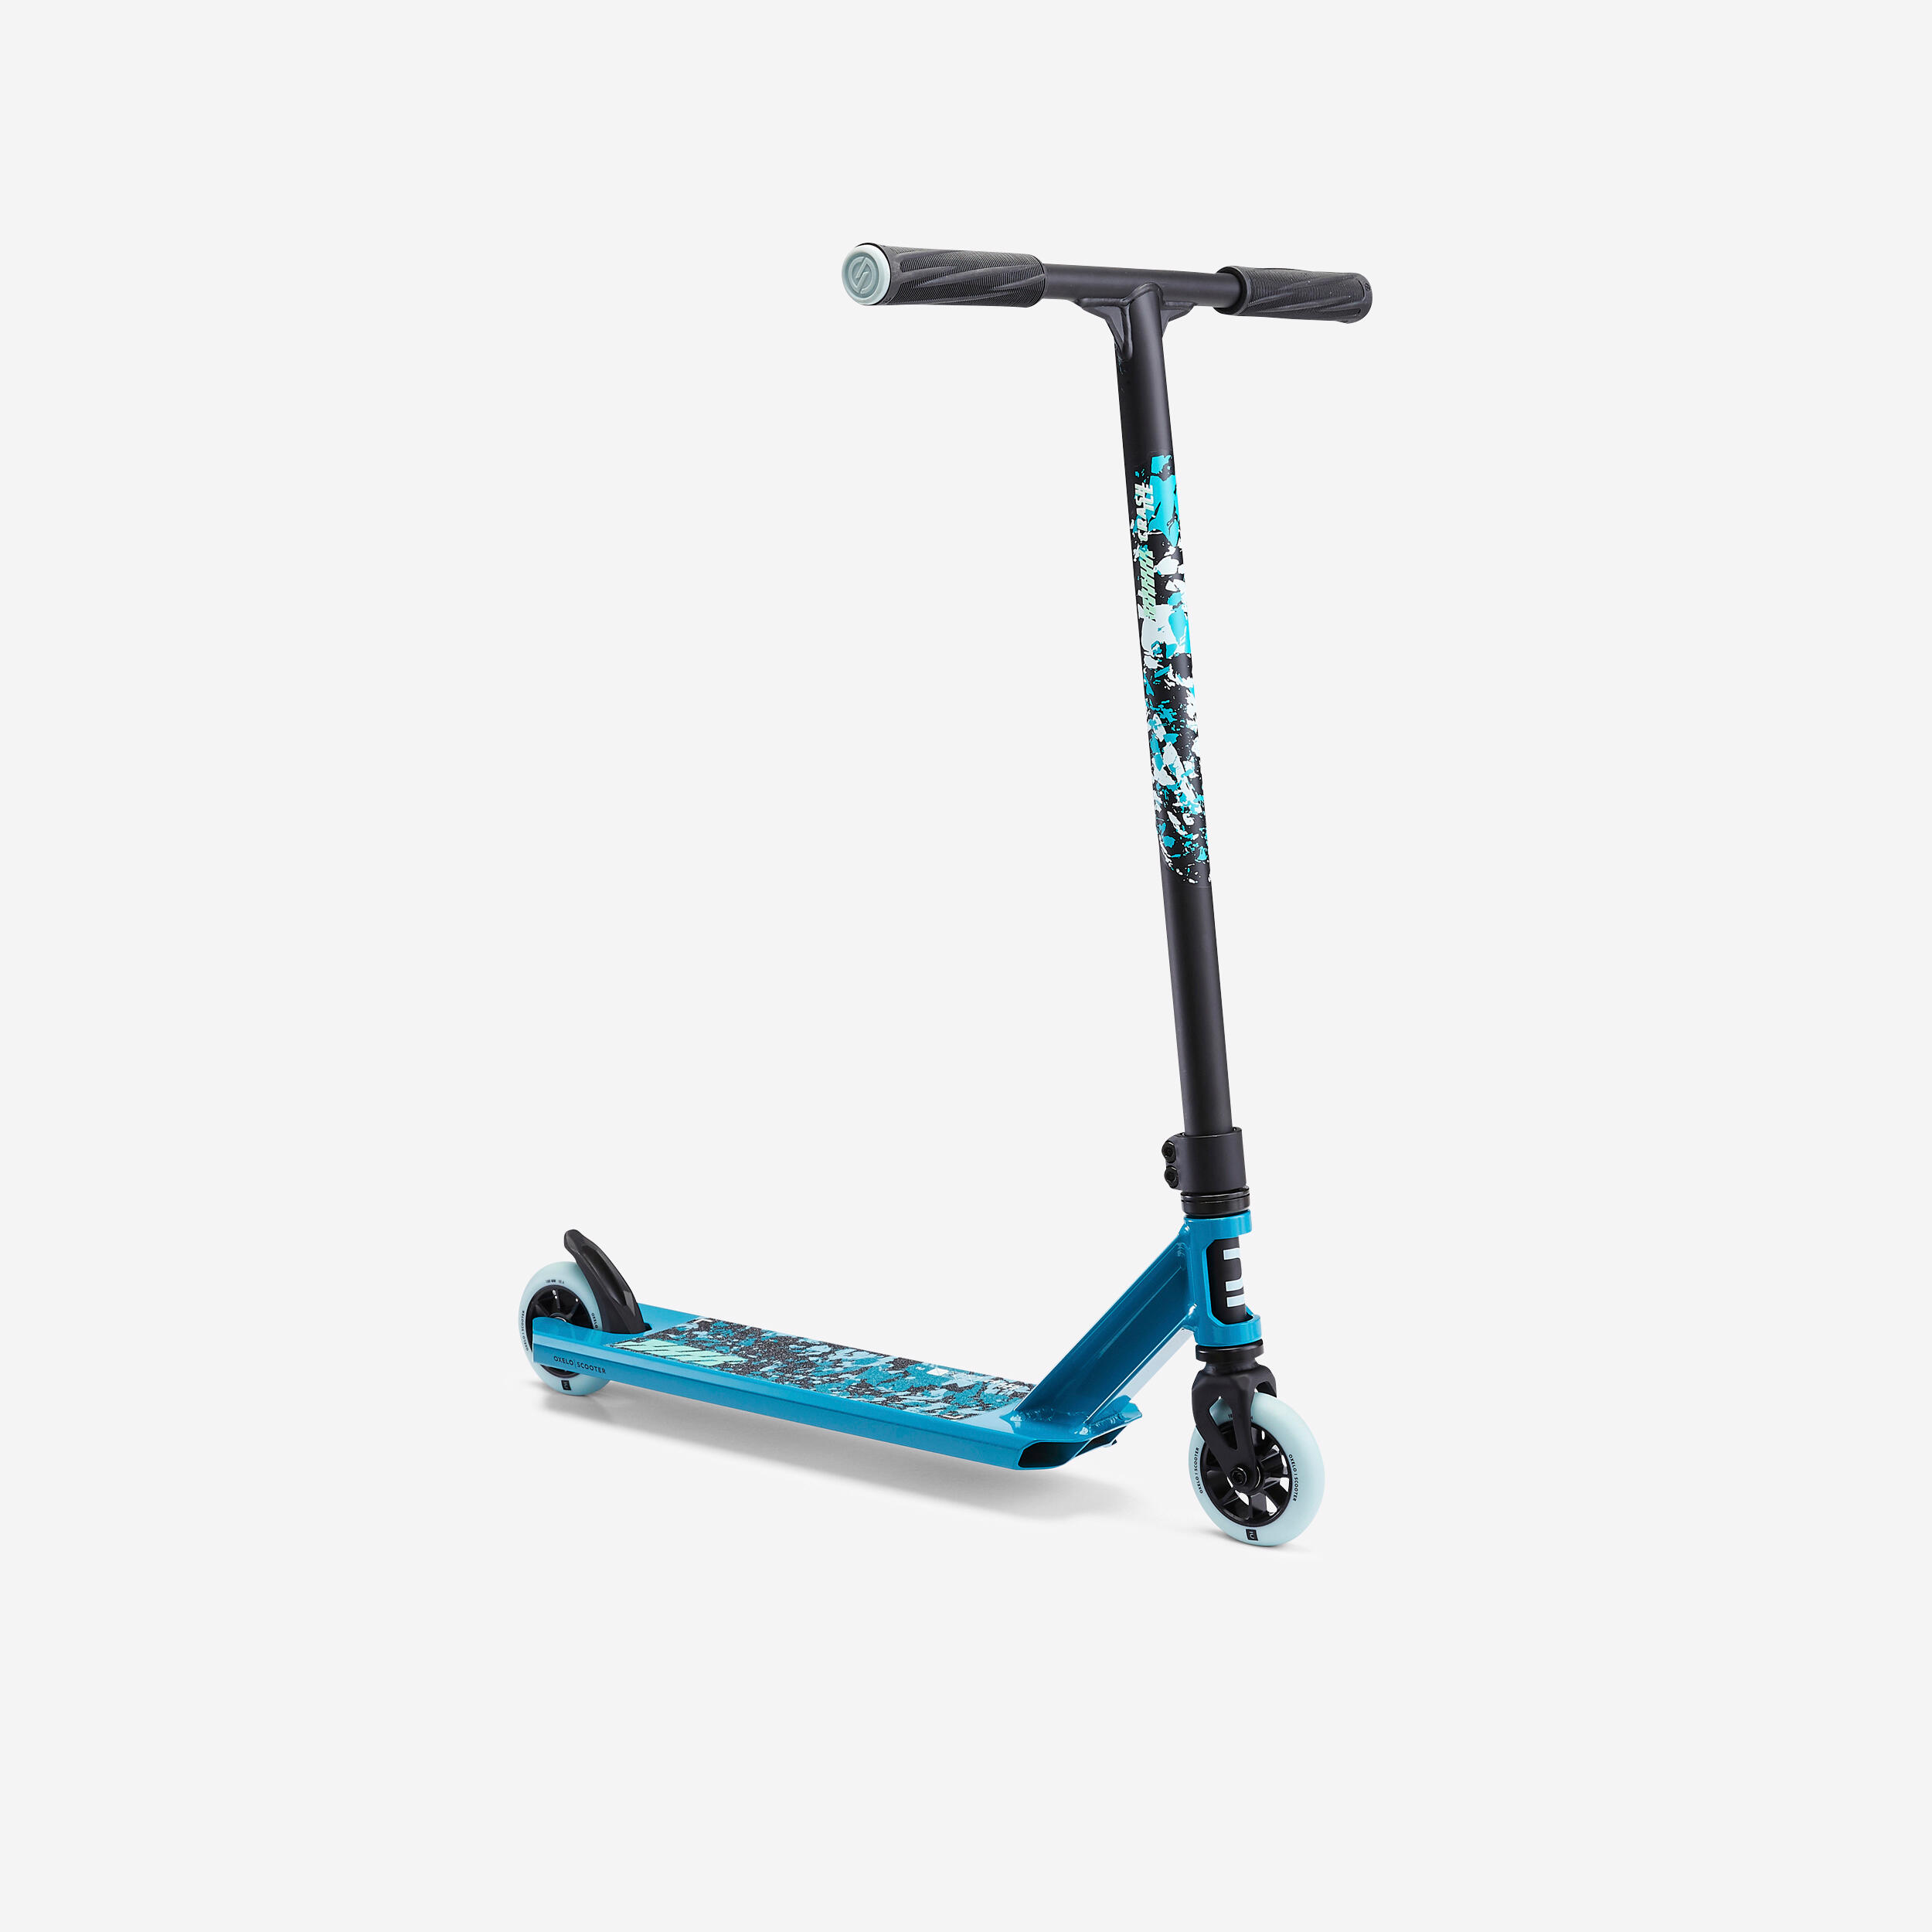 OXELO Freestyle Scooter MF500 - North Pole